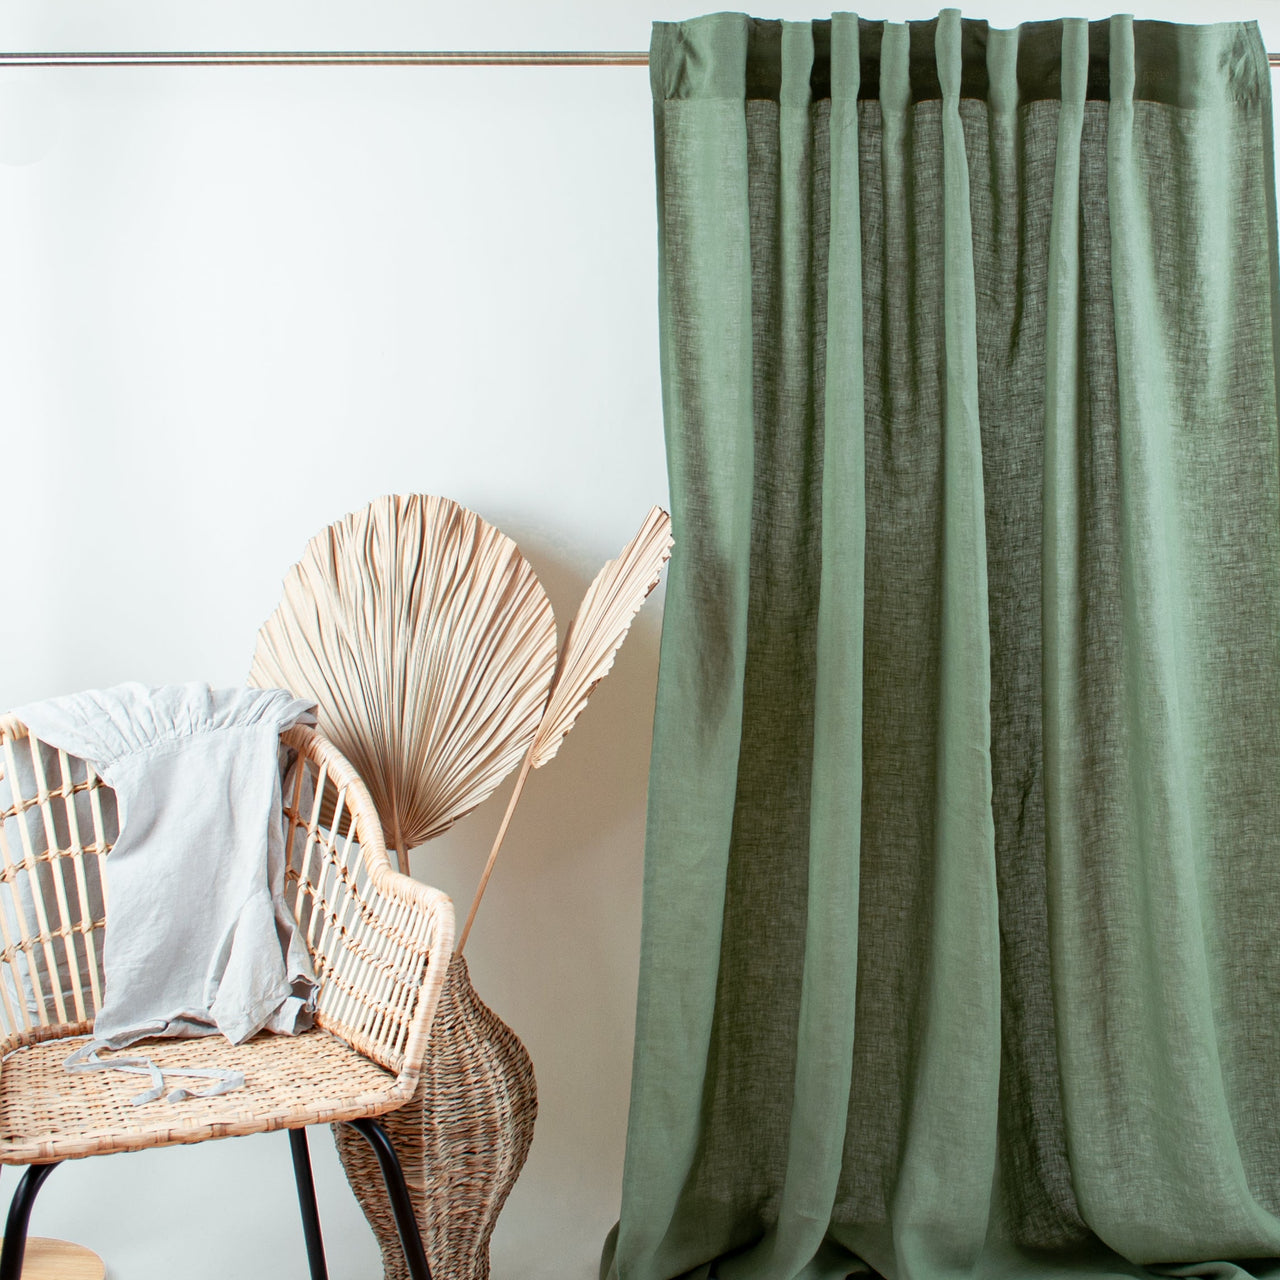  Frelement Linen Collection Curtain Fabric Sample